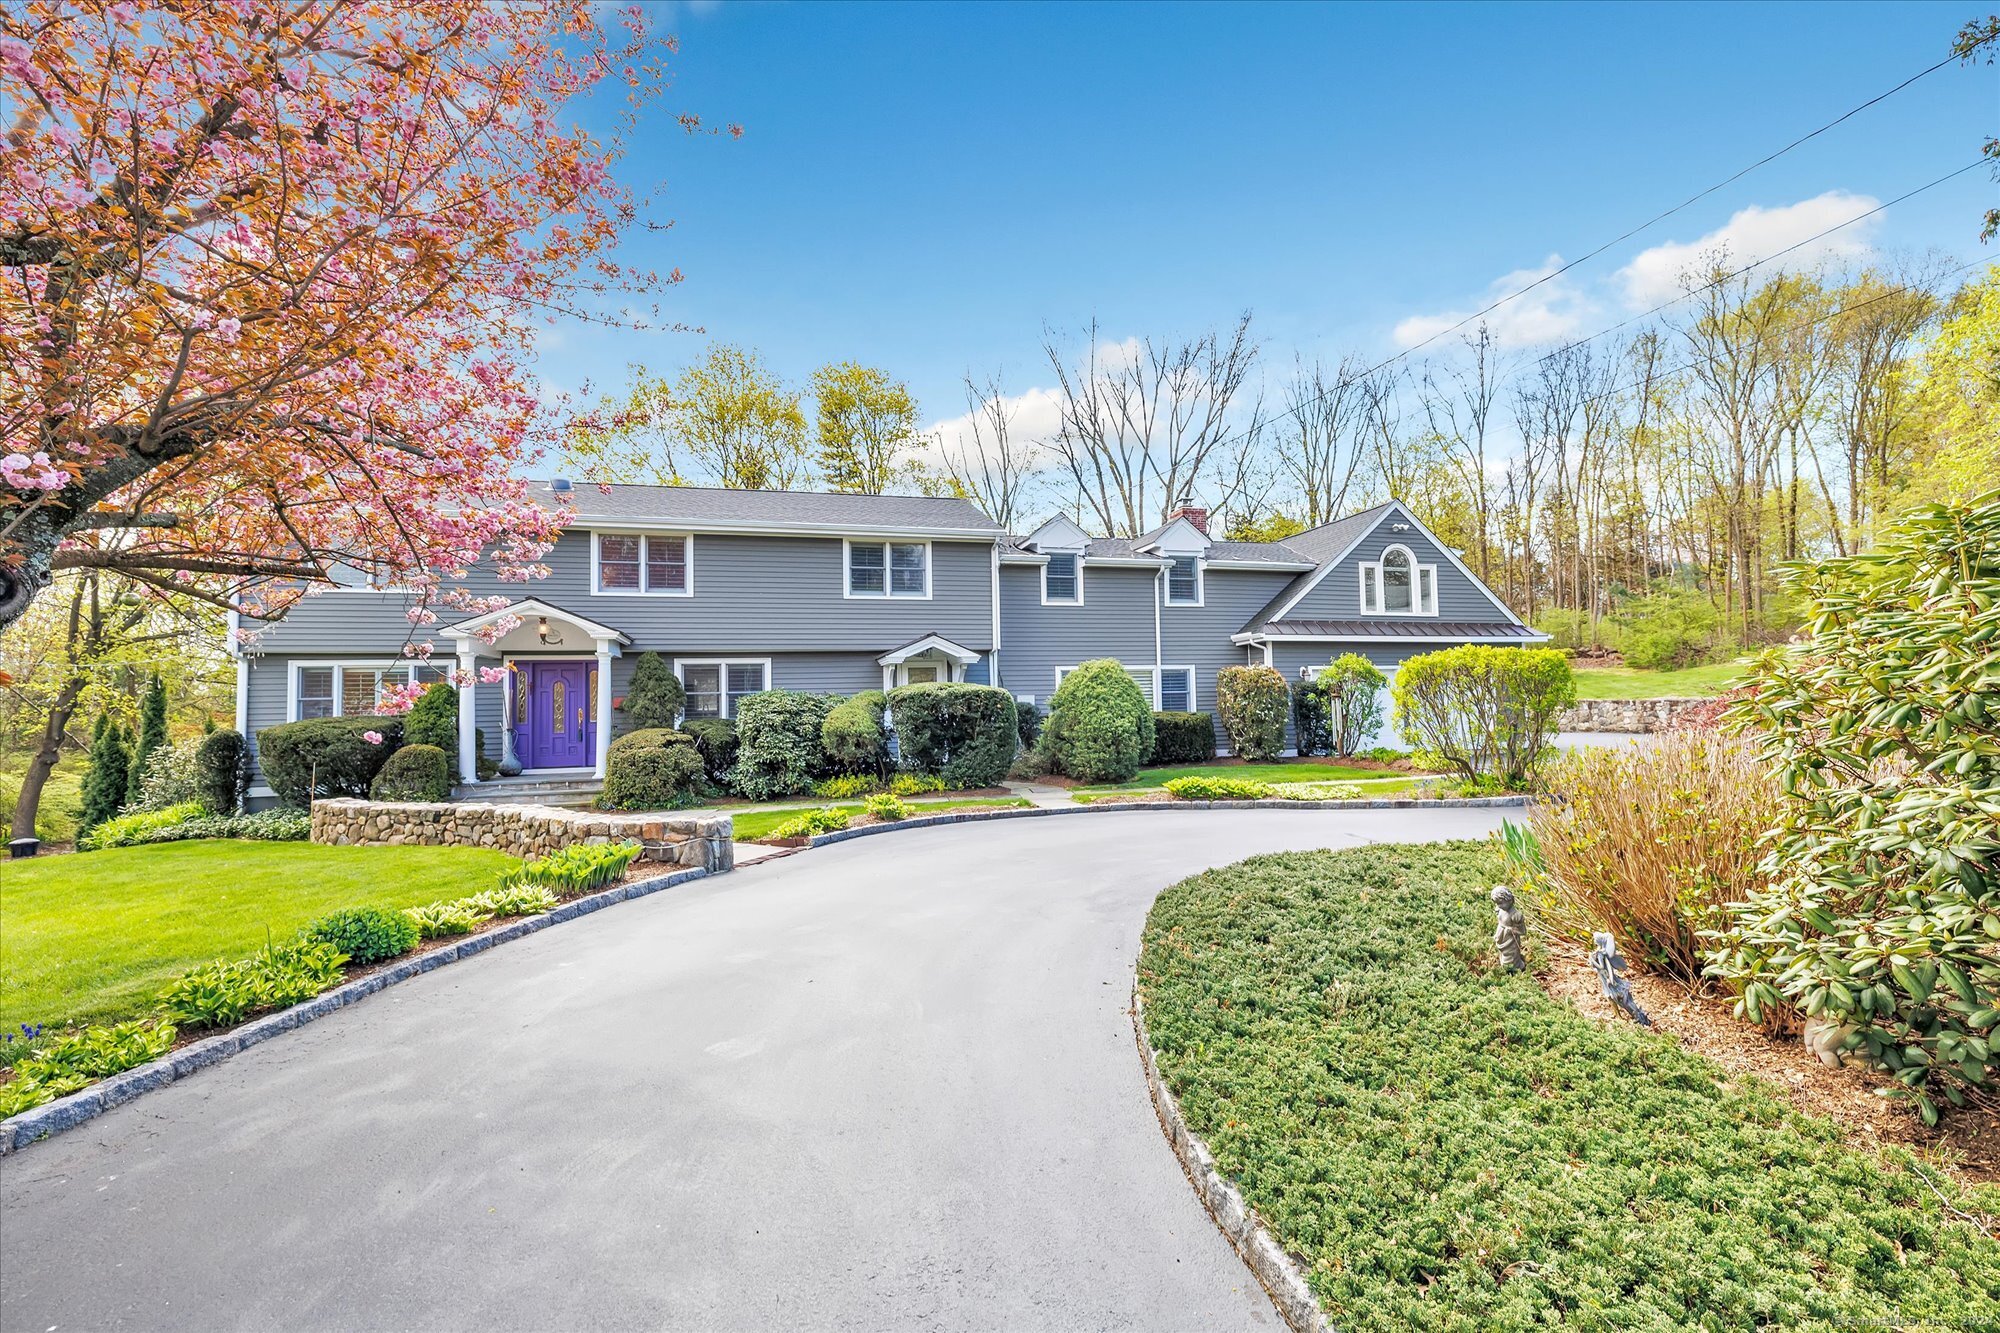 38 Tommys Lane, New Canaan, Connecticut - 5 Bedrooms  
5.5 Bathrooms  
9 Rooms - 